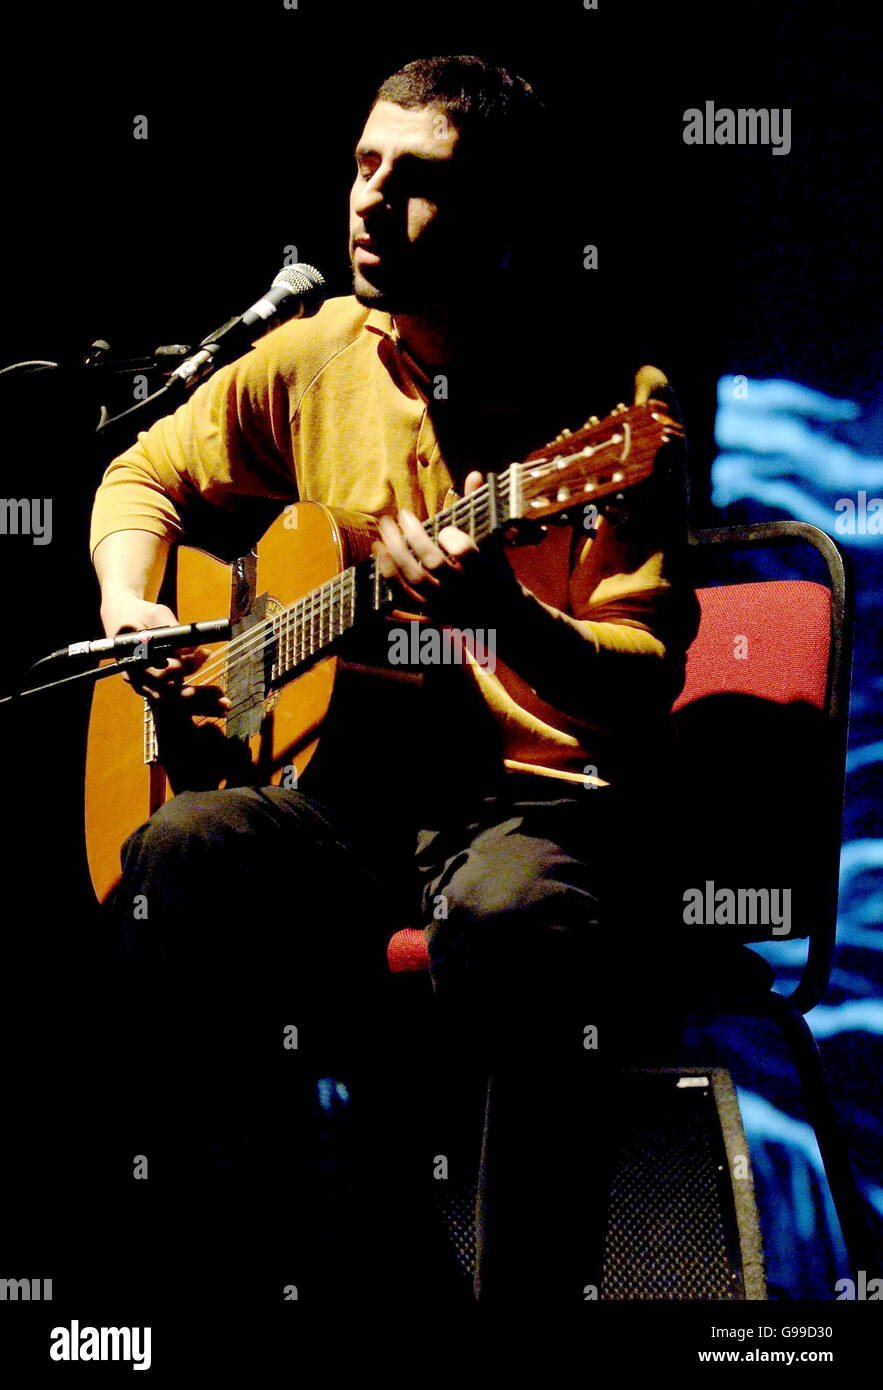 Jose Gonzales performs on stage - Carling Apollo Hammersmith, west London Stock Photo